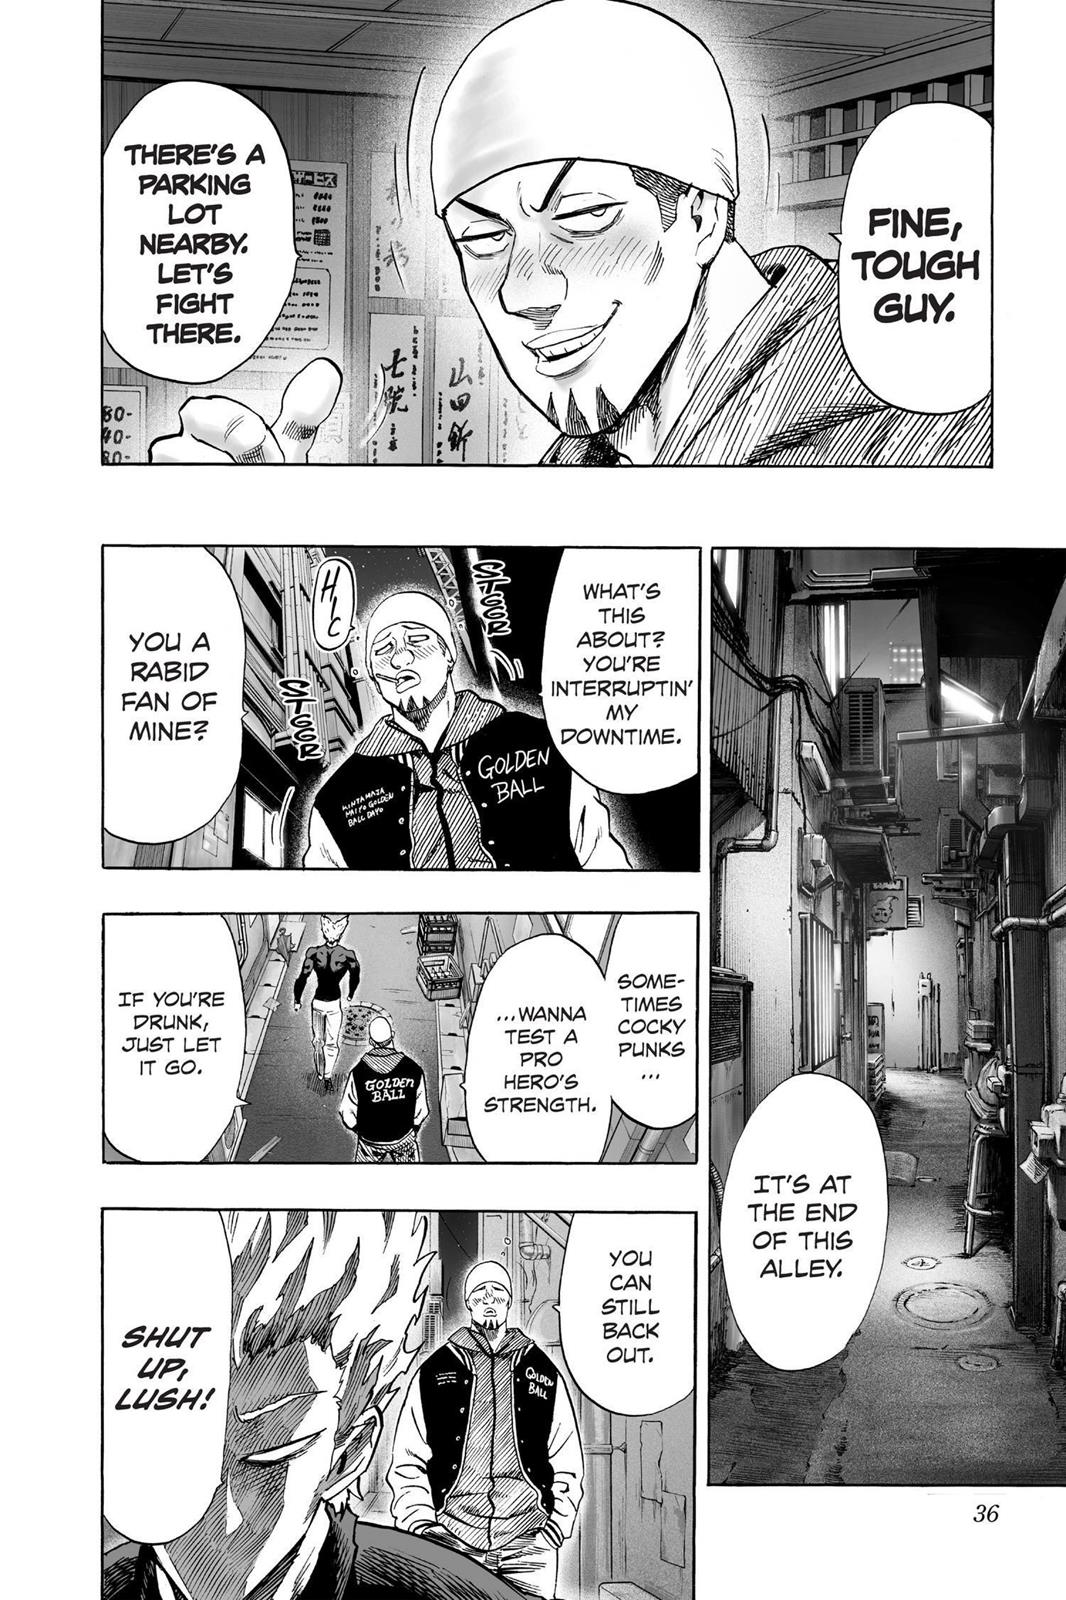 One-Punch Man, Punch 50 image 04